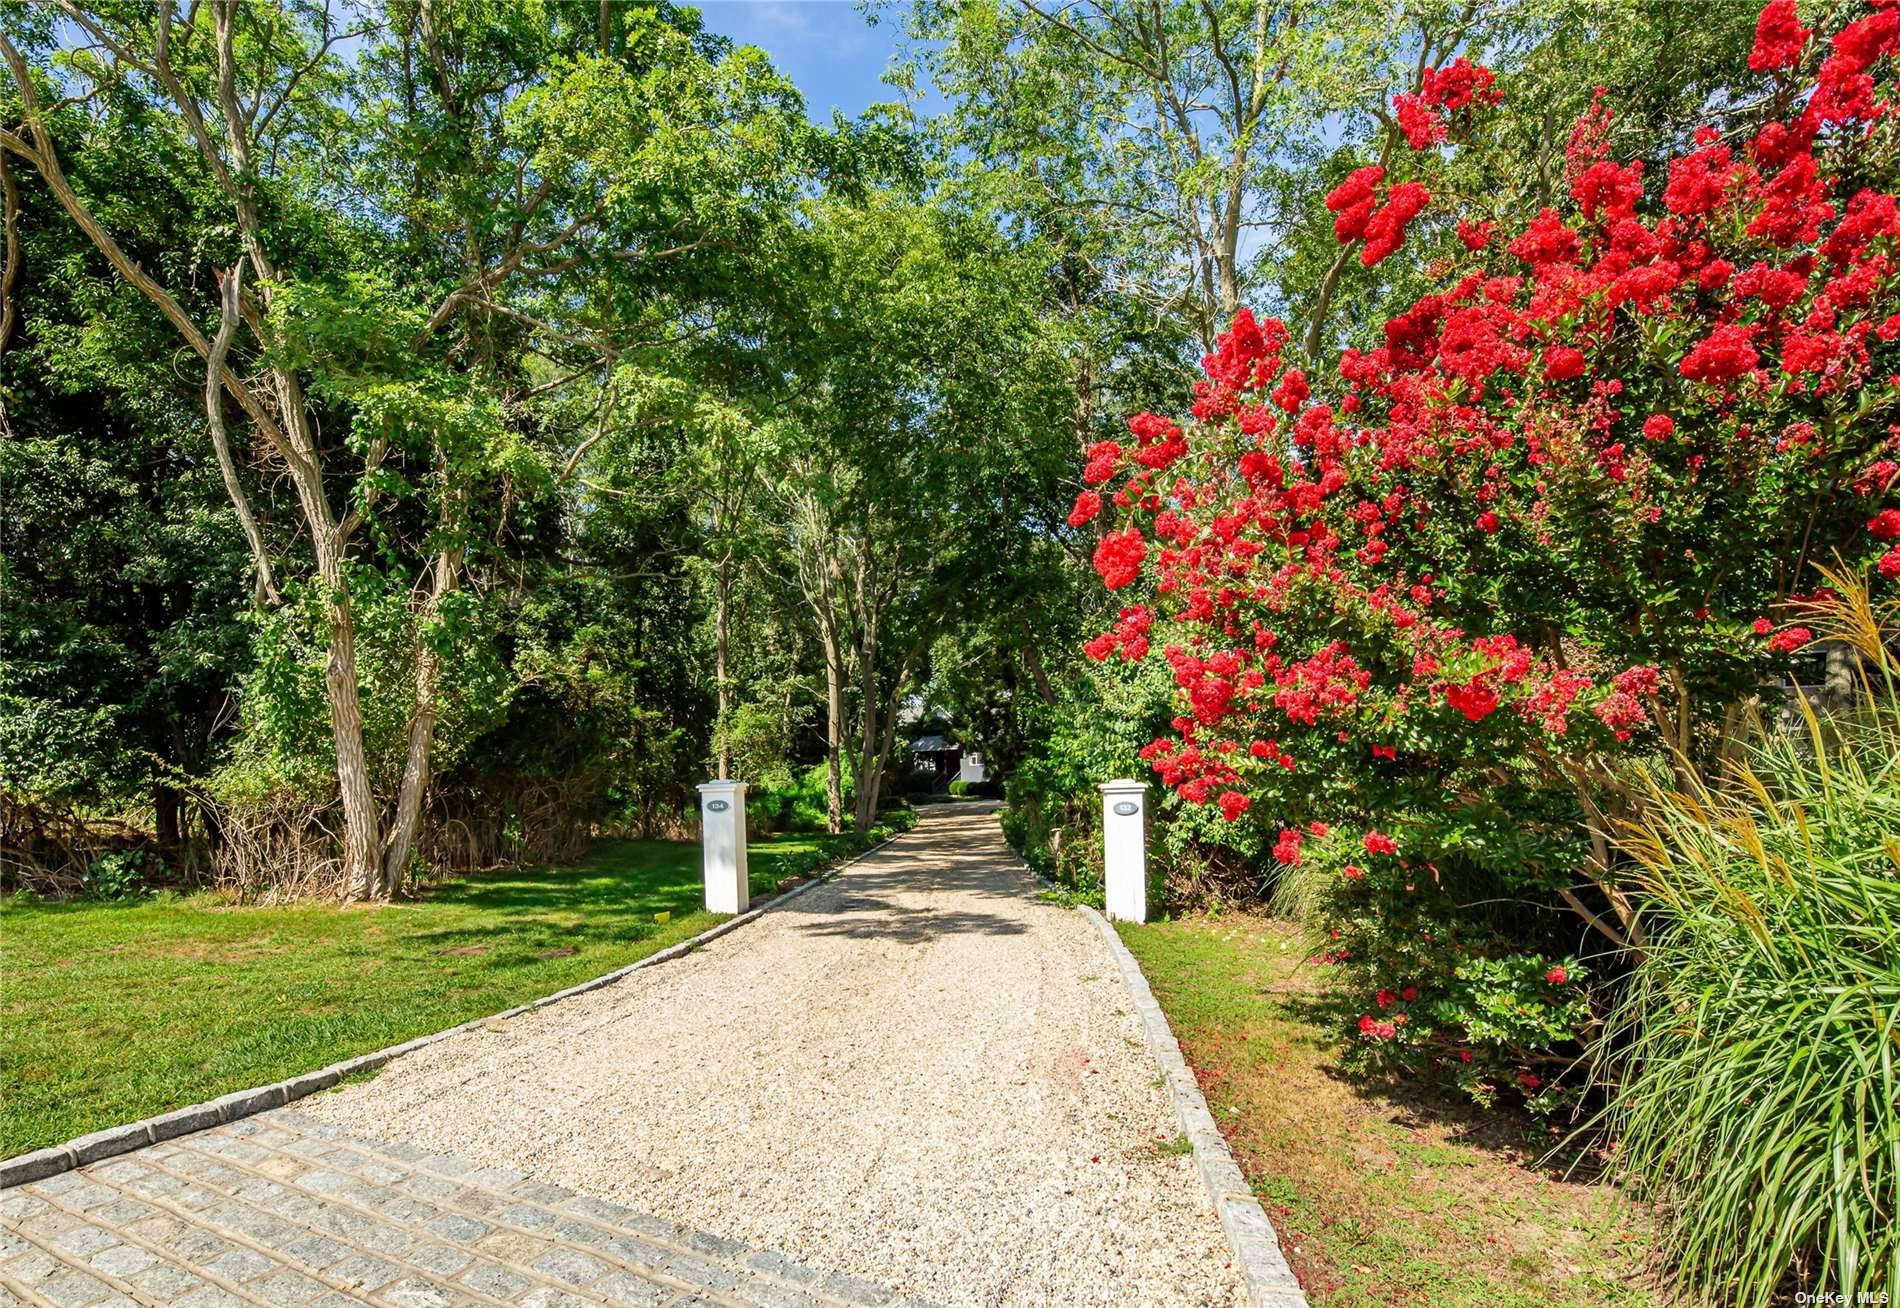 Marketing Text Bridgehampton Summer Rental This bright and spacious home, nestled down a private driveway and adjacent to a scenic reserve, is a hidden gem off Lumber Lane in Bridgehampton.